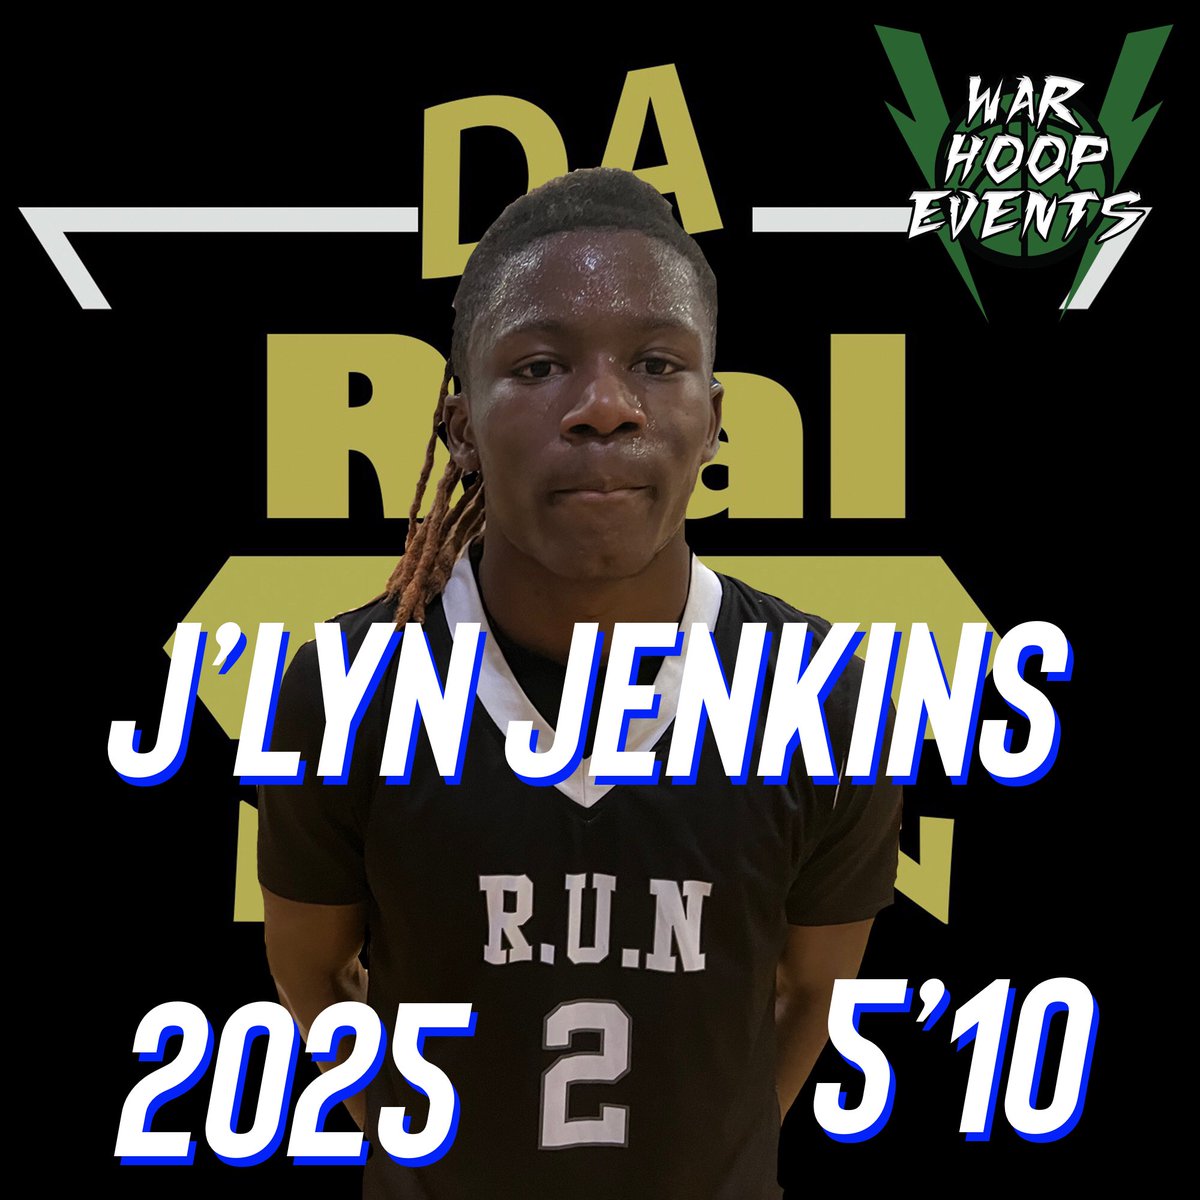 @Warb4storm 2024 recap: @TeamBlessed2025 pg @jlynjenkins3 of @HebronHawksBB was a sight for sore eyes, blazing speed, crazeeee 🏀 handles, goes by everyone whenever he wants; finishes strong at the cup; killa pull up J, great kick out passer too; LAZY 😂 WATCH #DaREALtalkNation